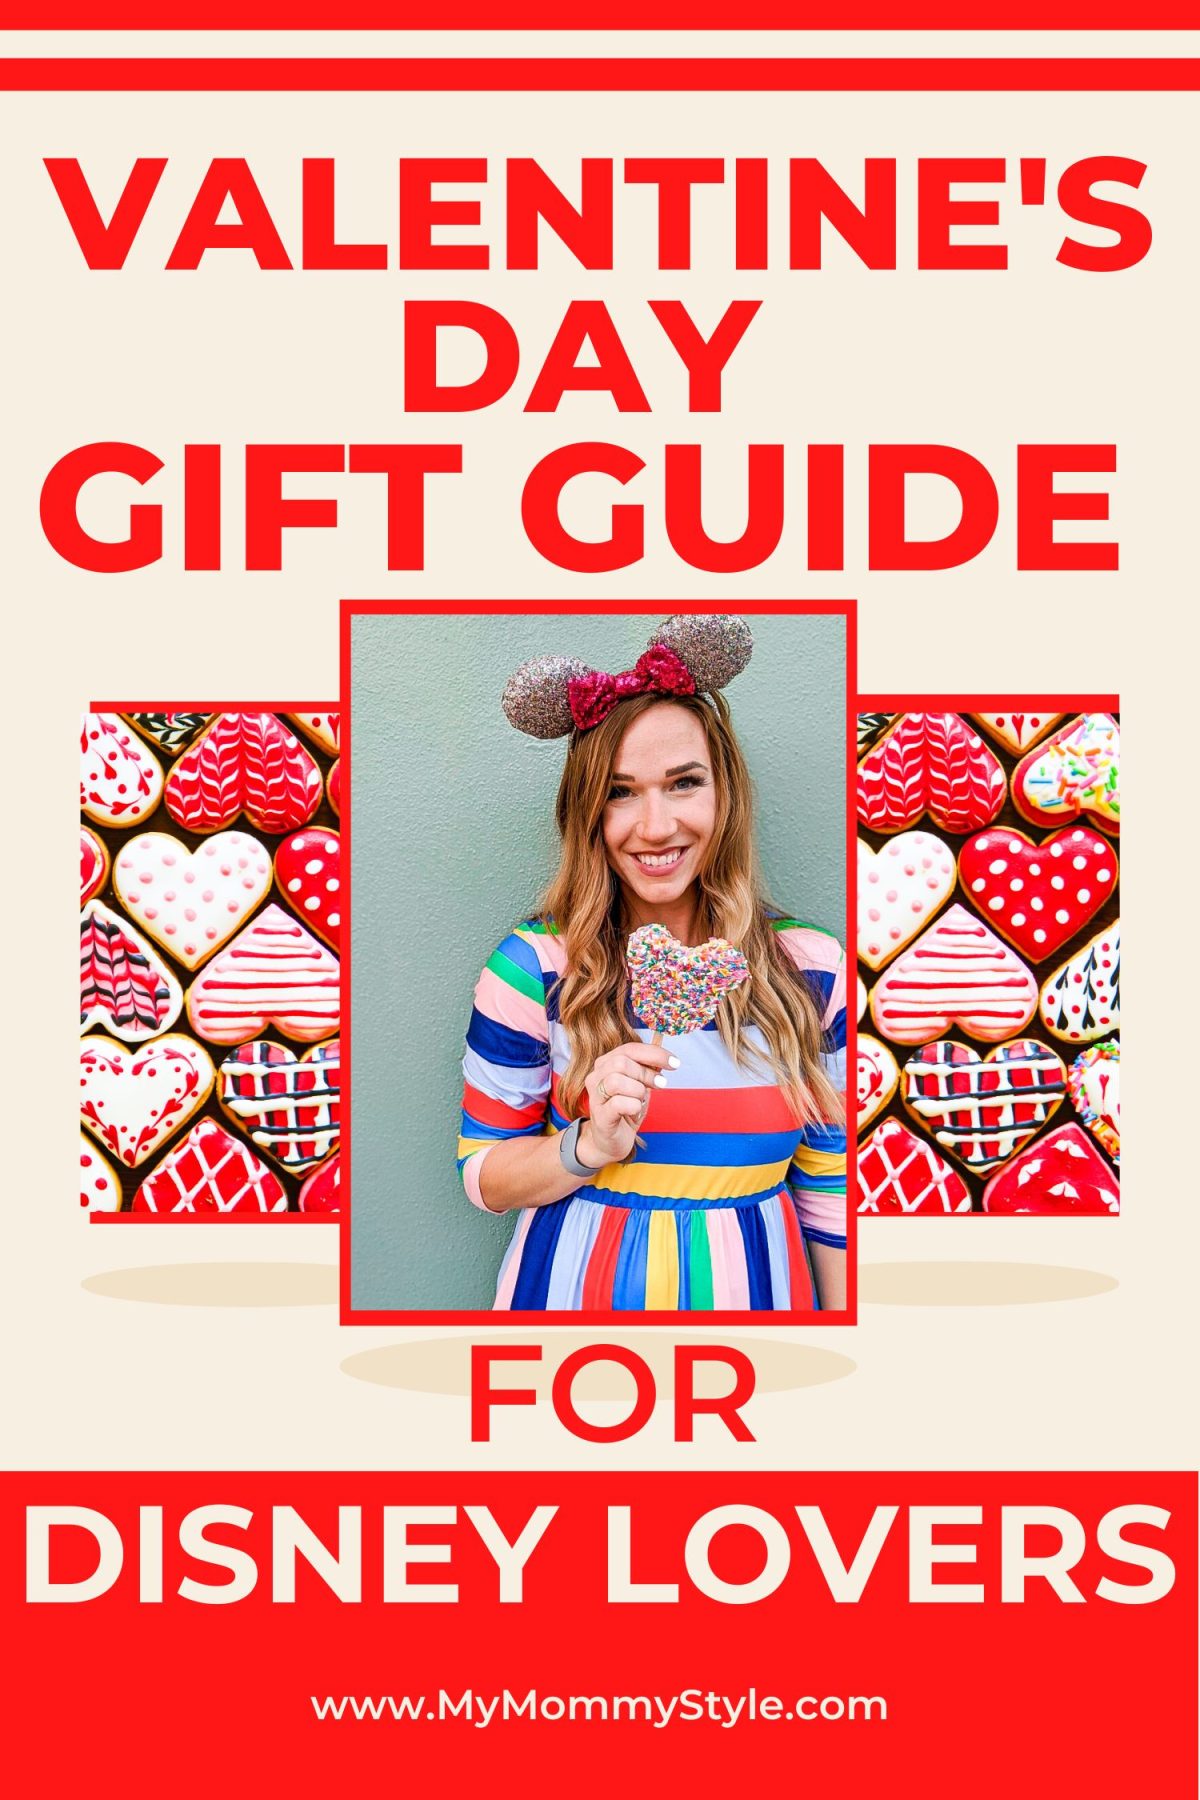 Looking for the perfect gift for your favorite Disney lover? Look no further! This ultimate guide is packed with ideas that will make anyone's heart race. From classic gifts like plush toys and clothing to more unique options like park tickets and autographed memorabilia, we've got you covered. So start browsing and put a smile on your loved one's face this Valentine's Day! #valentinesdaygiftguide via @mymommystyle